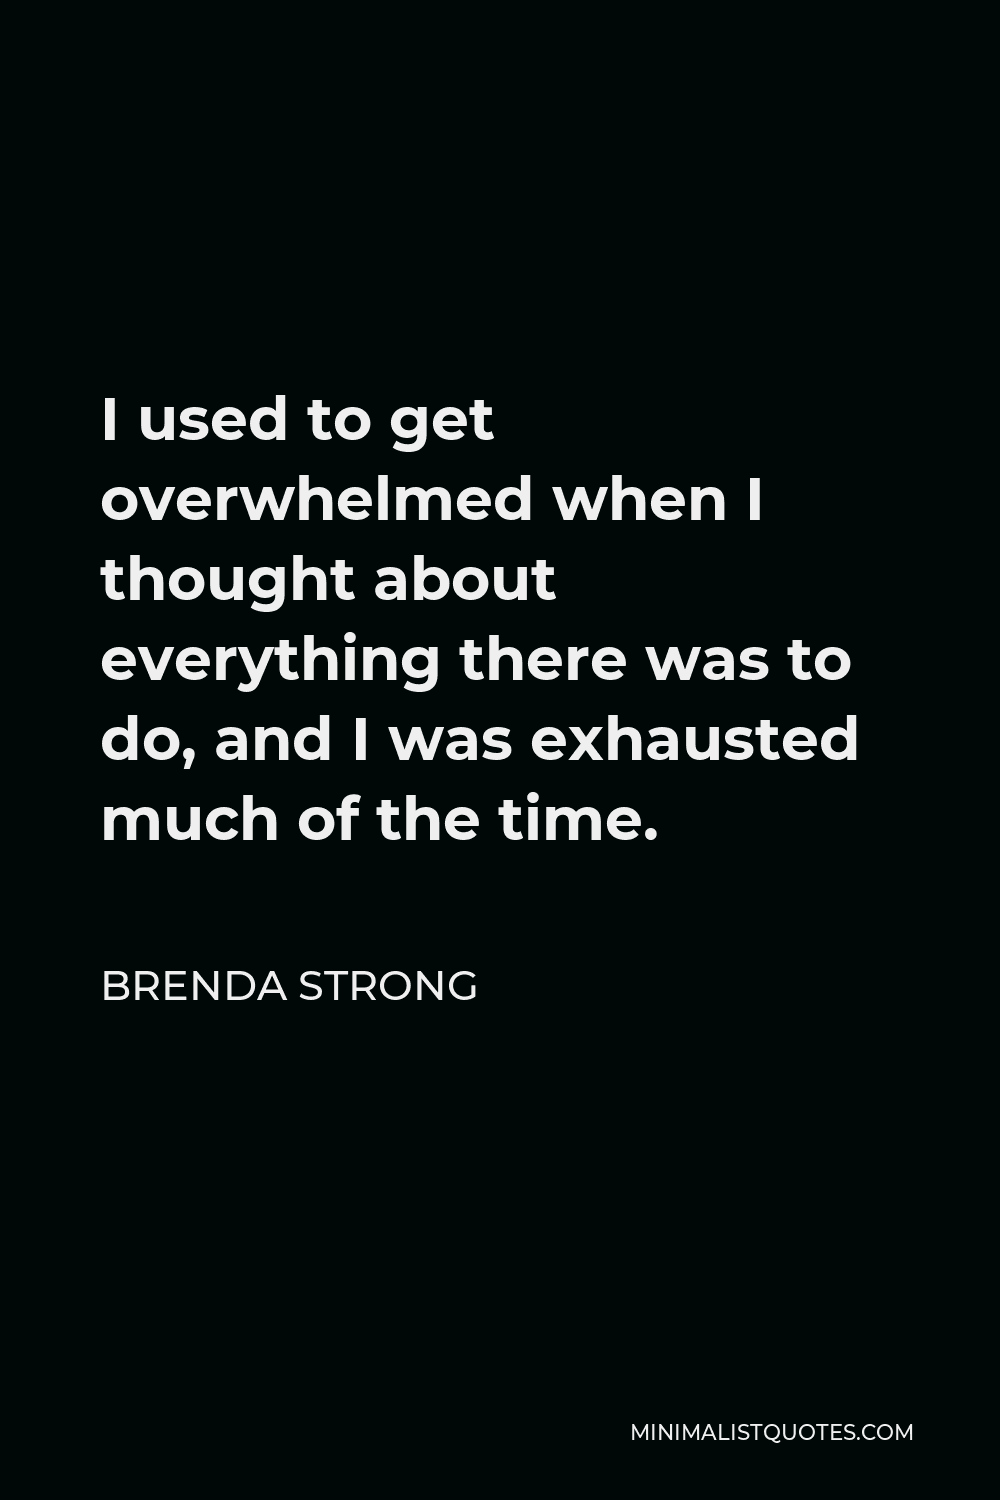 Brenda Strong Quote - I used to get overwhelmed when I thought about everything there was to do, and I was exhausted much of the time.